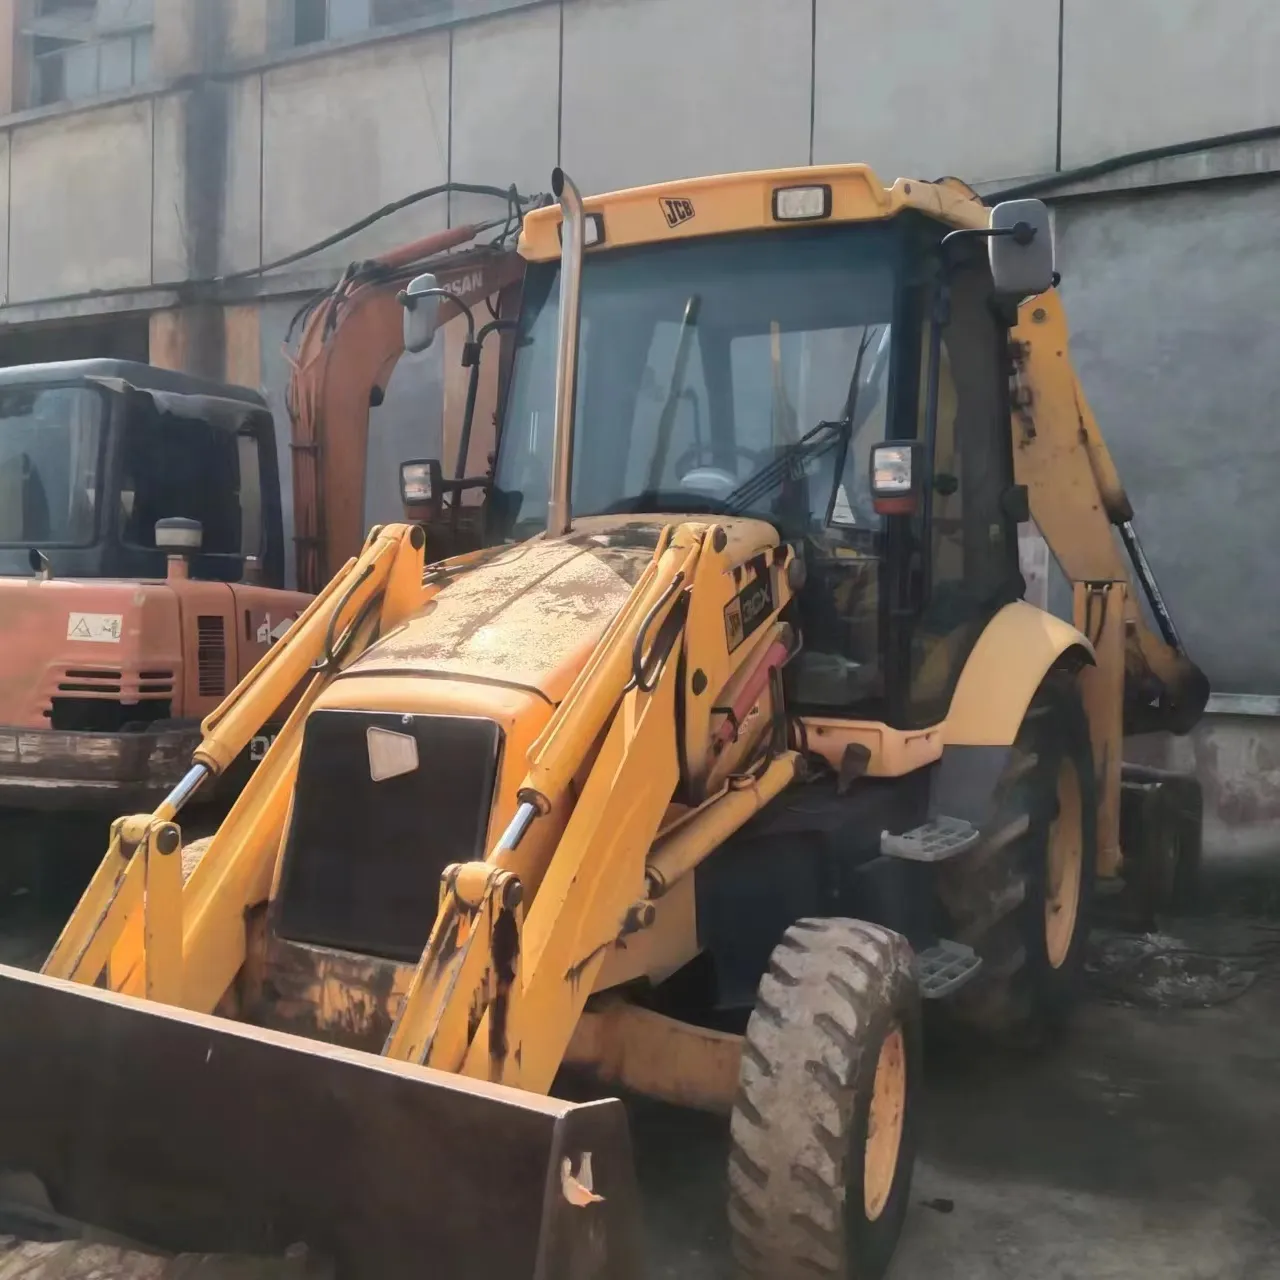 Used JCB Loader in stock JCB 3CX Backhoe Loaders for sale construction equipment with telescopic arm wheel excavator second-hand